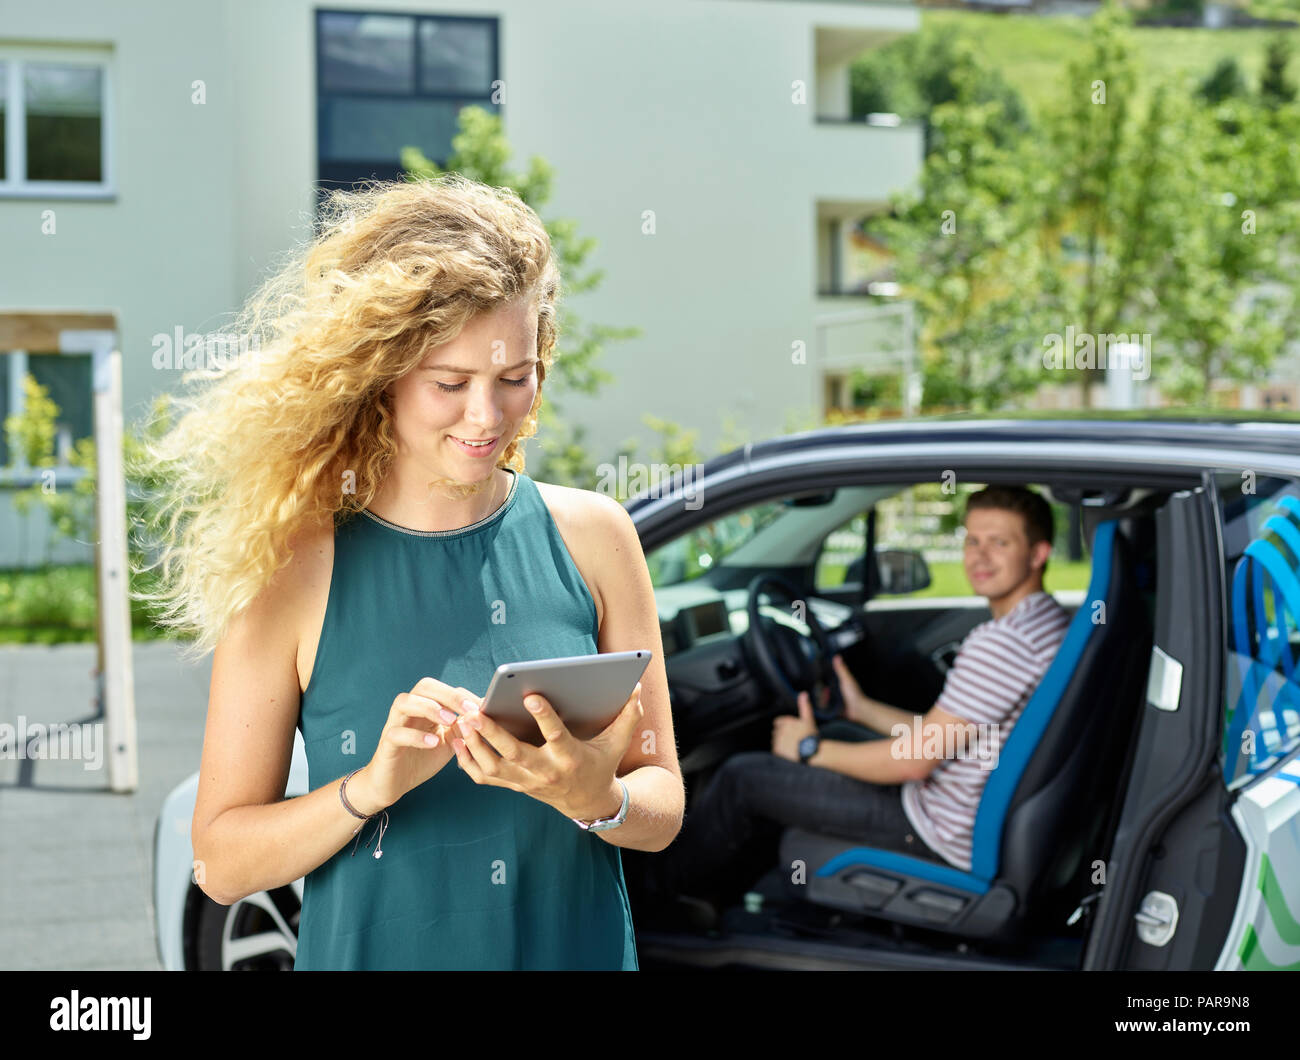 Smiling young woman using tablet with man sitting in electric car in background Stock Photo